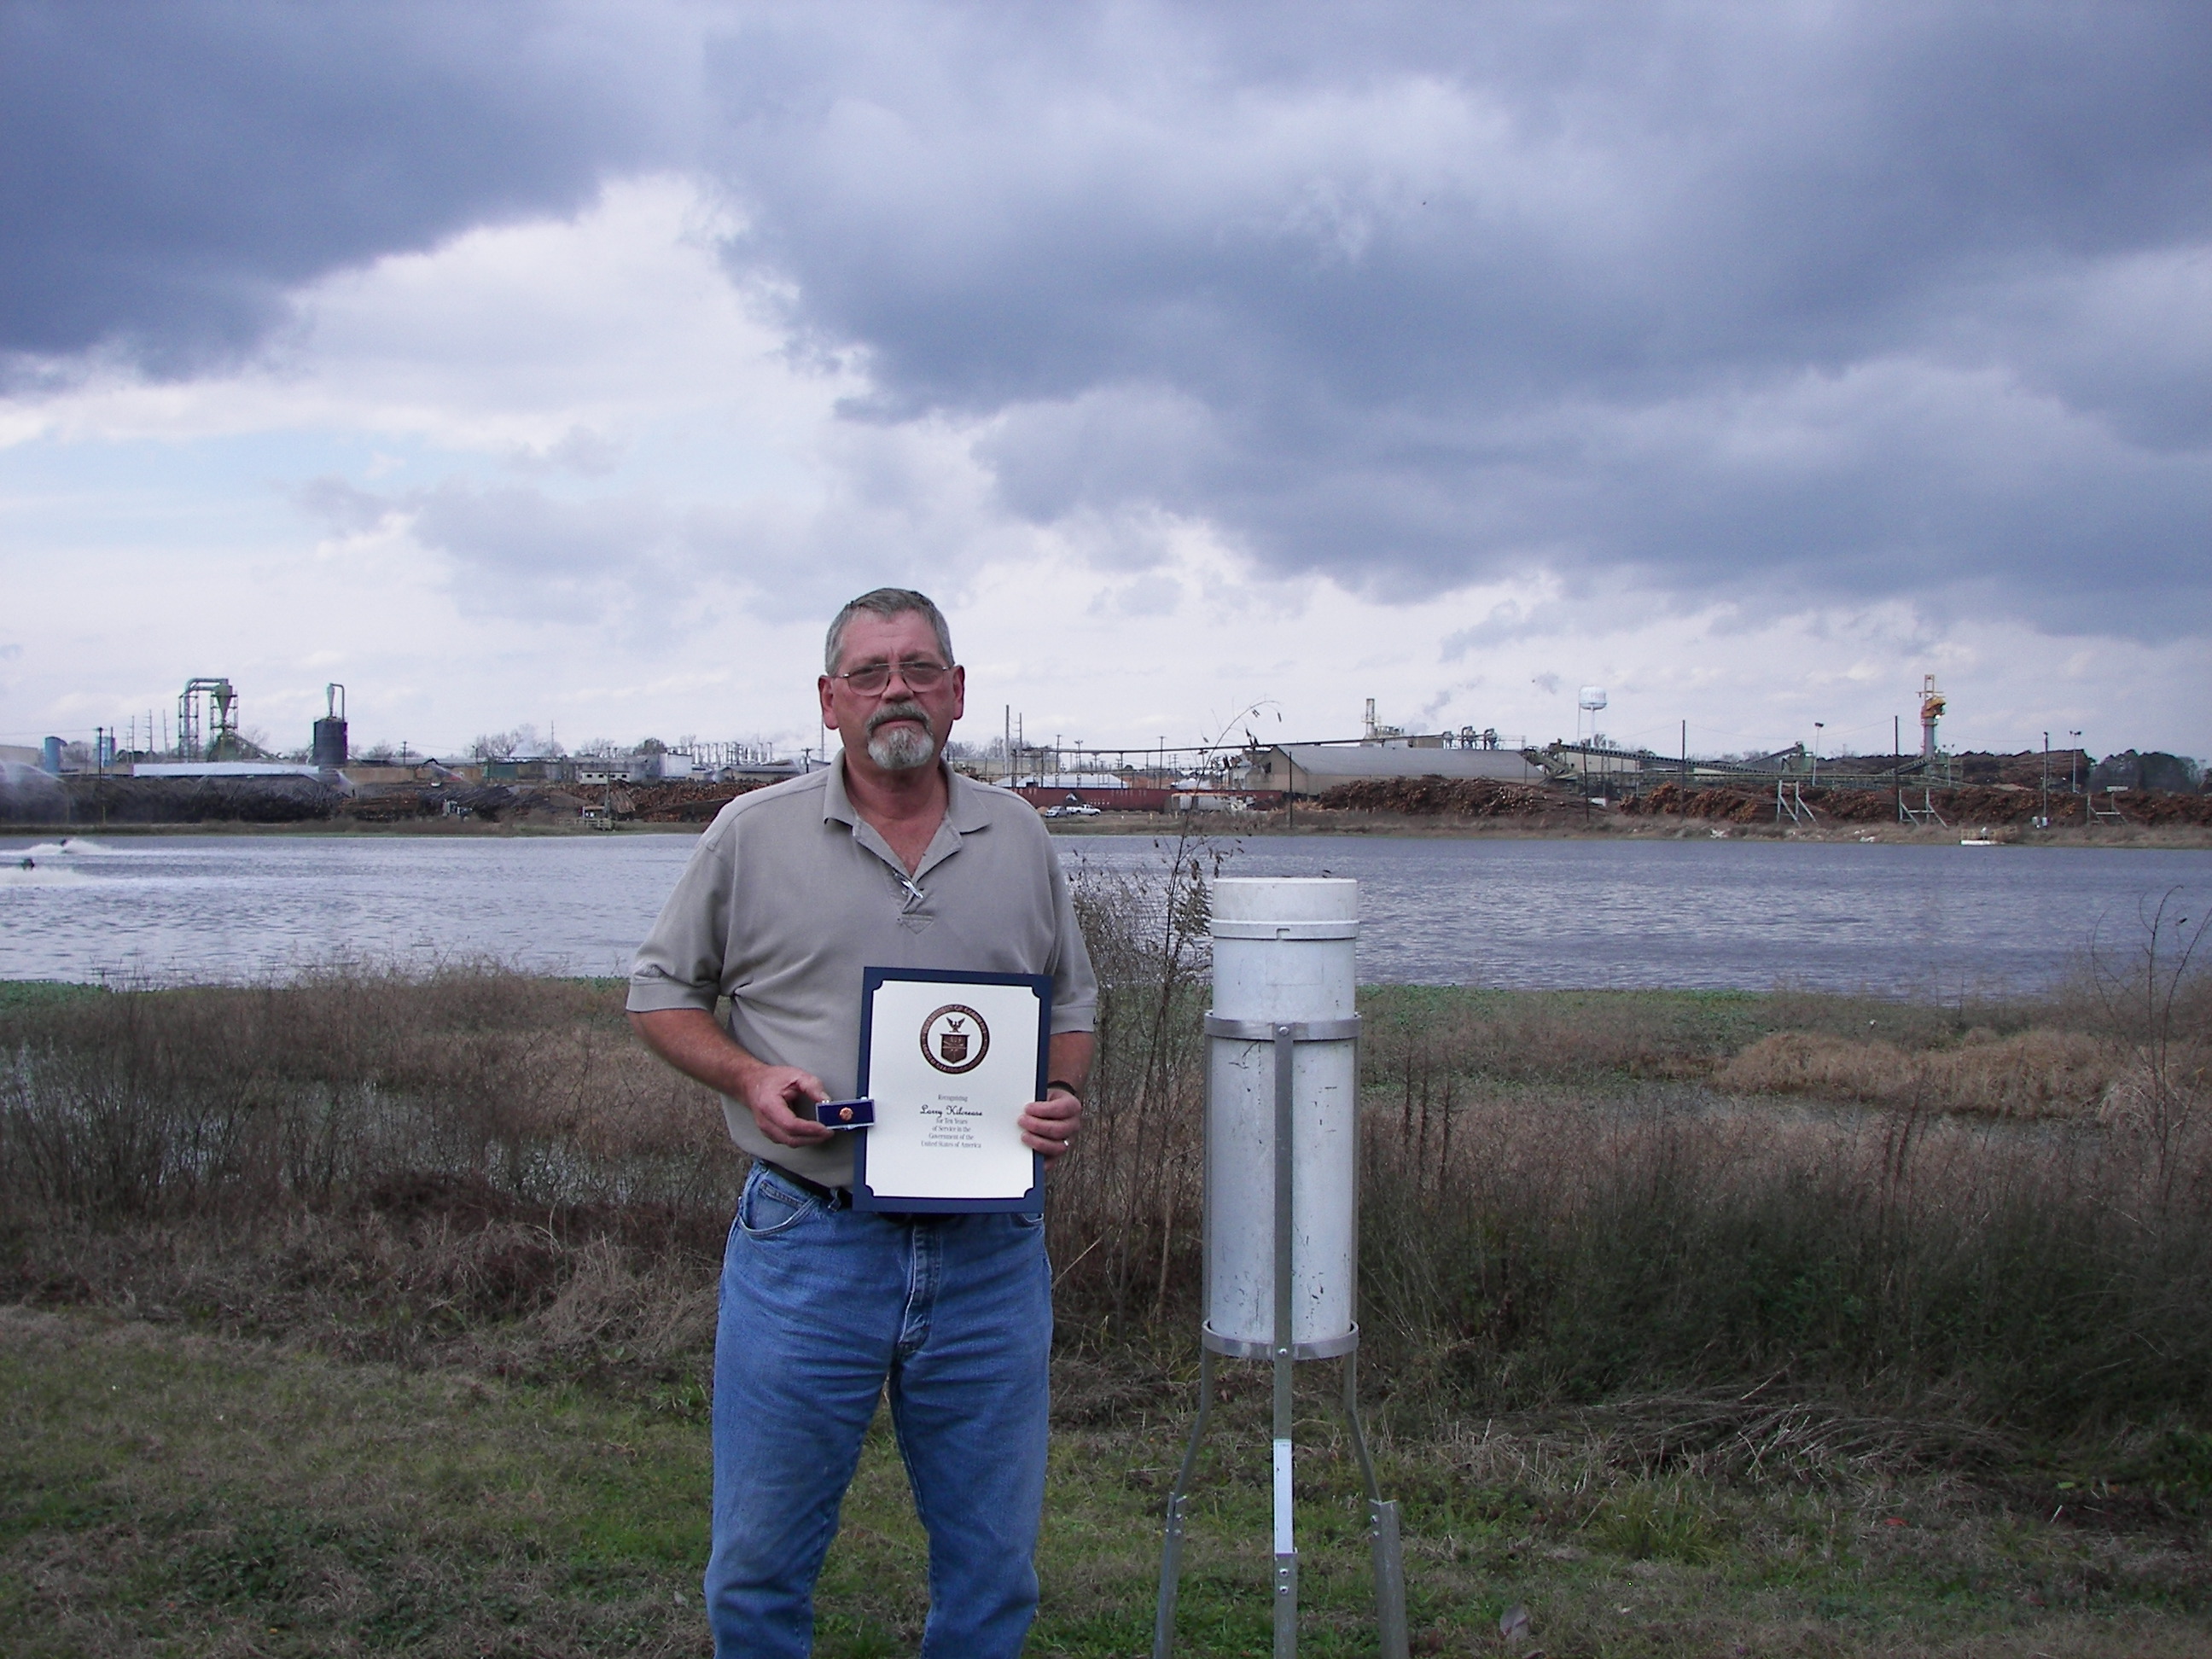 Larry Kilcrease of Pineland, TX, received a 10-Year Length of Service Award in 2008